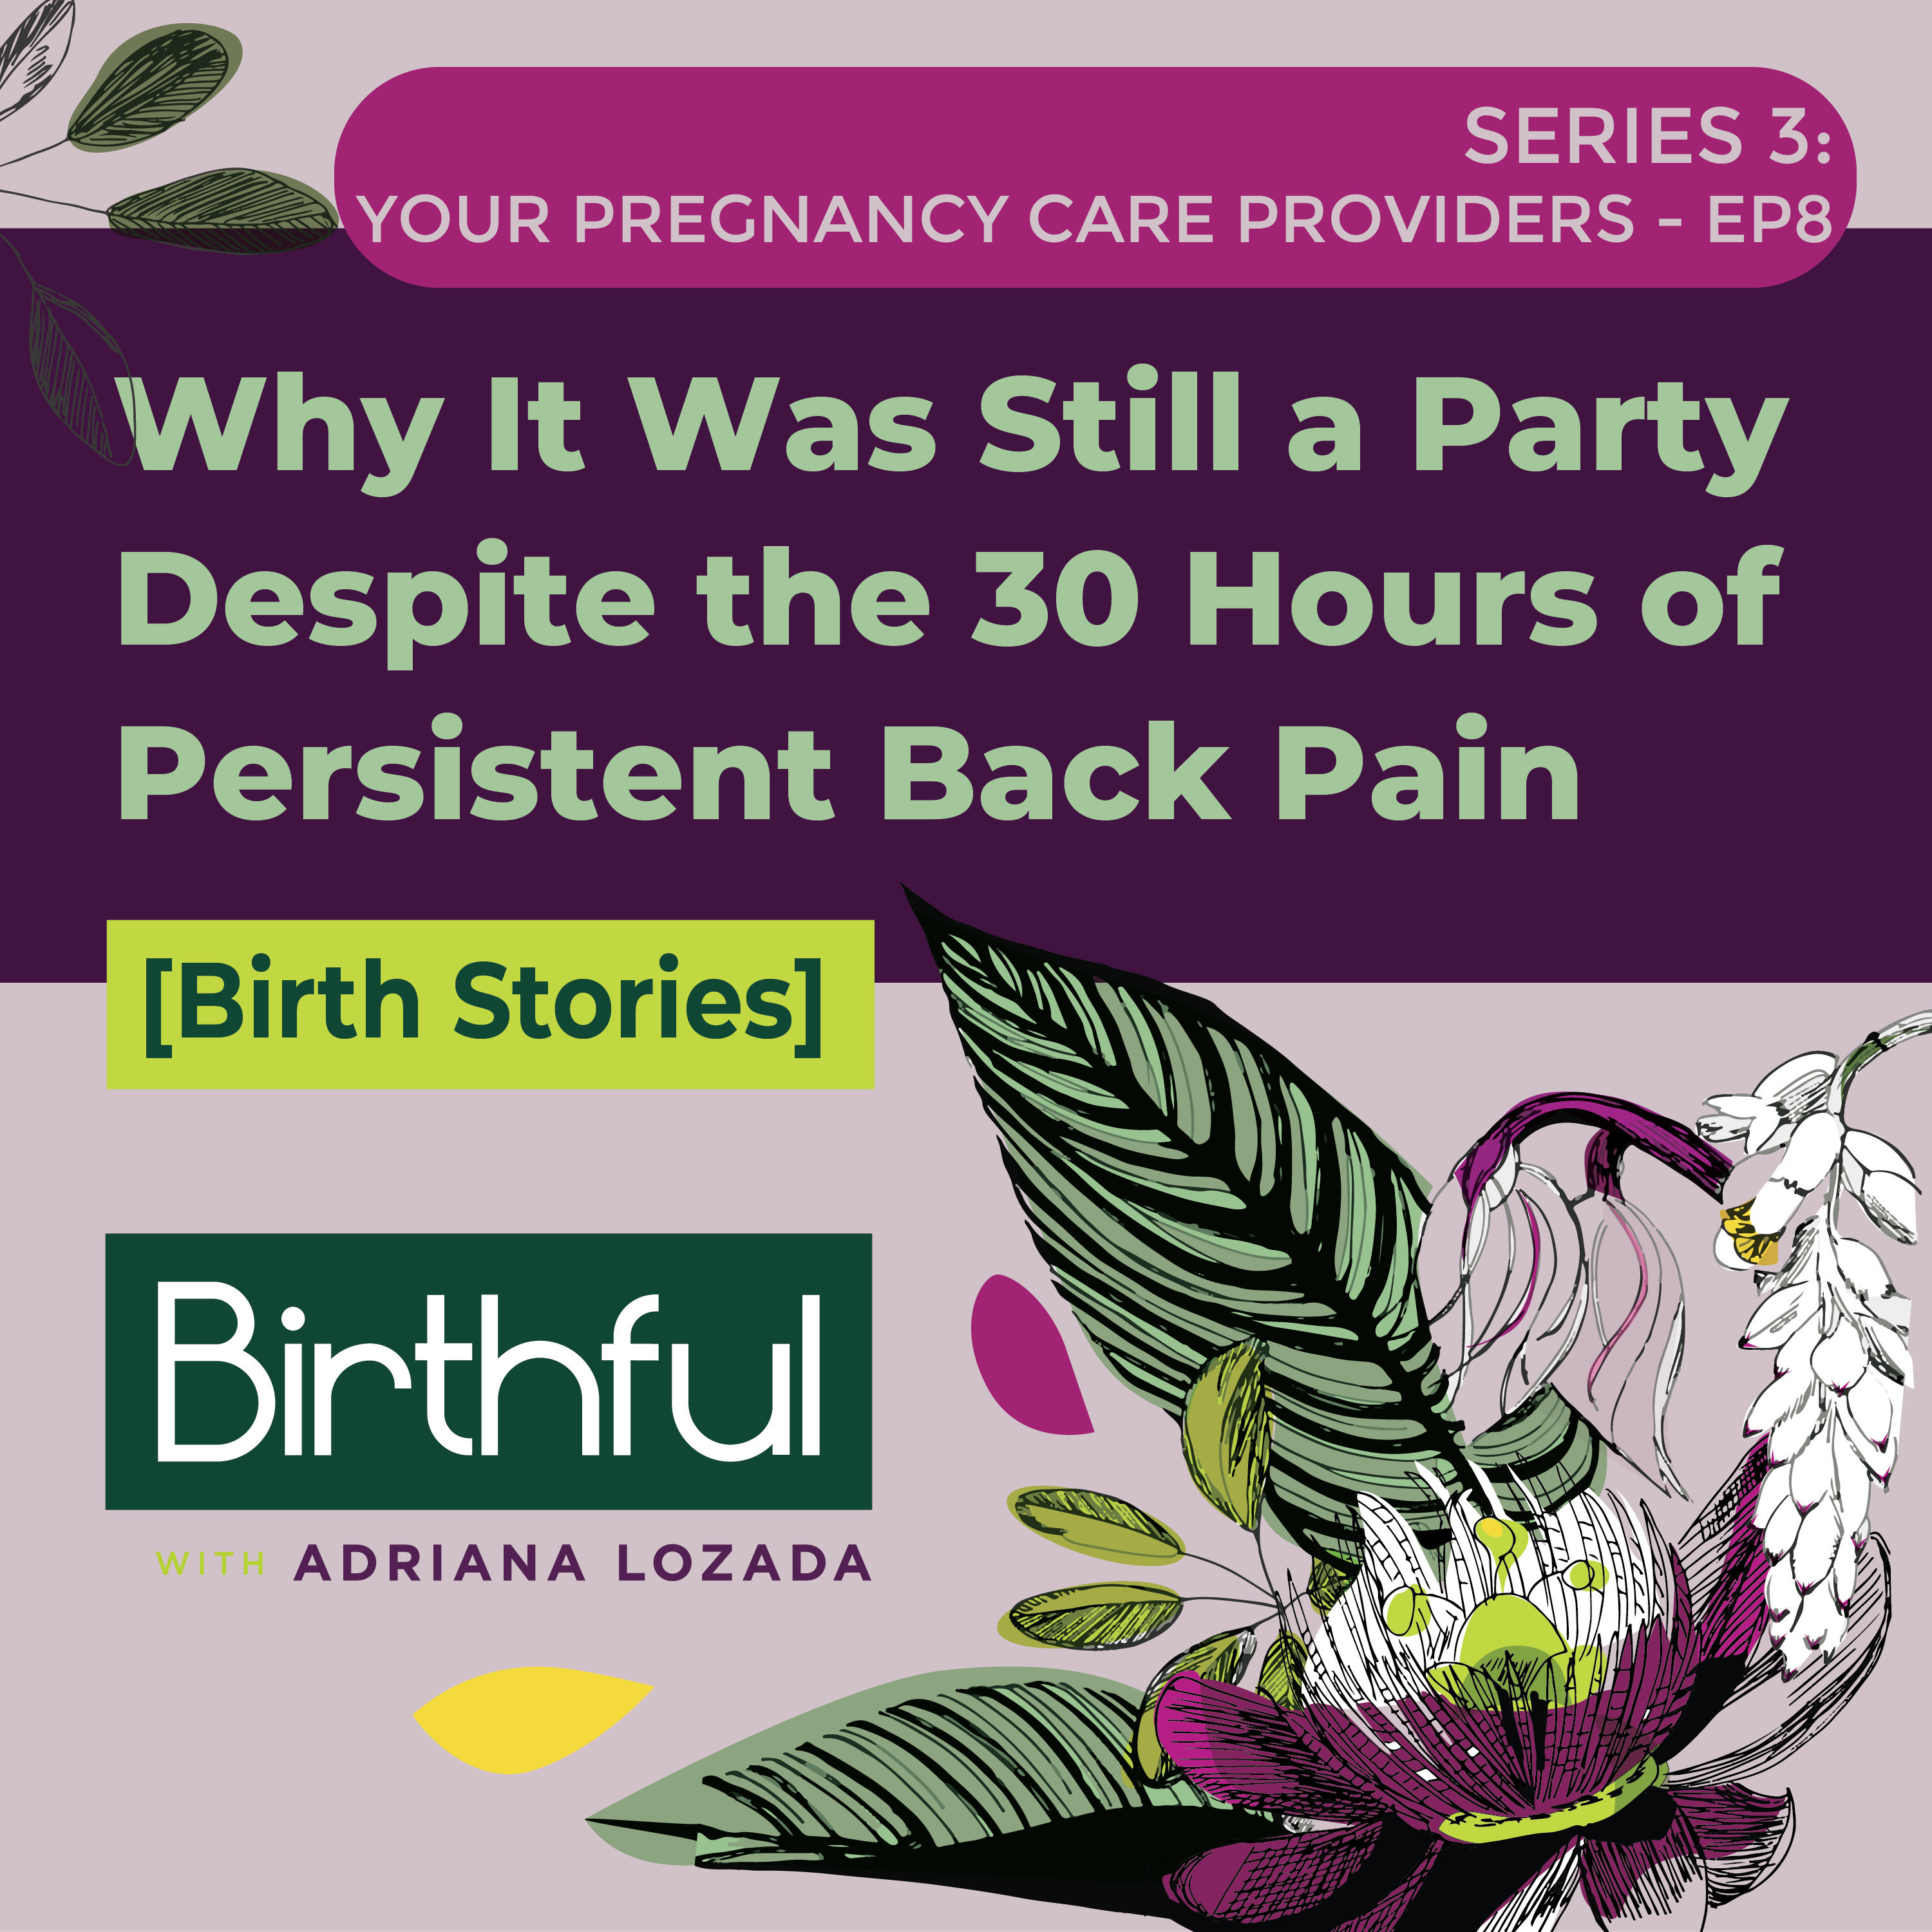 [Birth Stories] Why It Was Still a Party Despite the 30 Hours of Persistent Back Pain